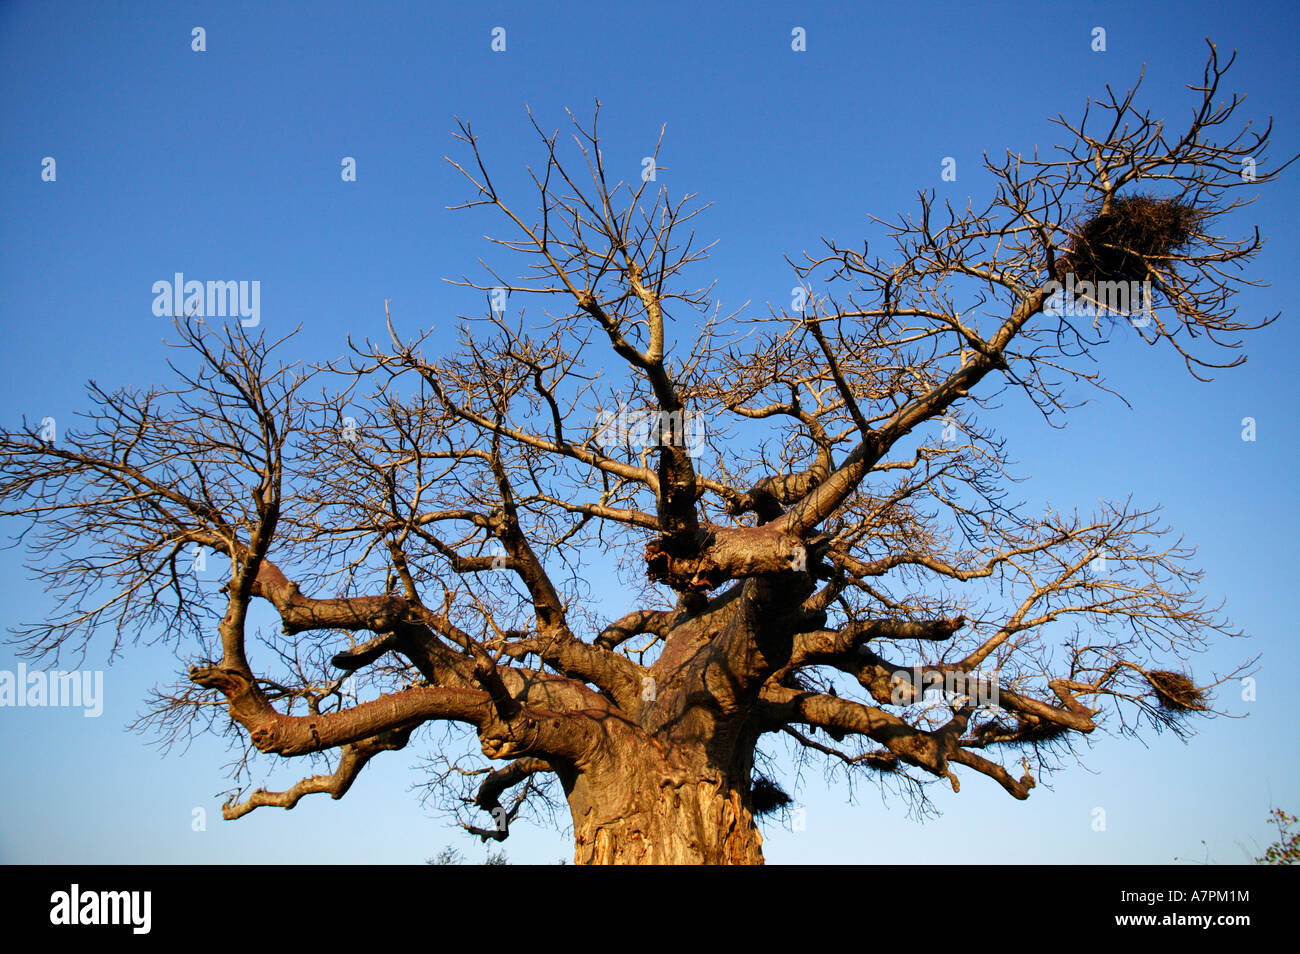 A Baobab tree Adansonia digitata with buffalo weavers nests in its branches Kruger National Park Stock Photo